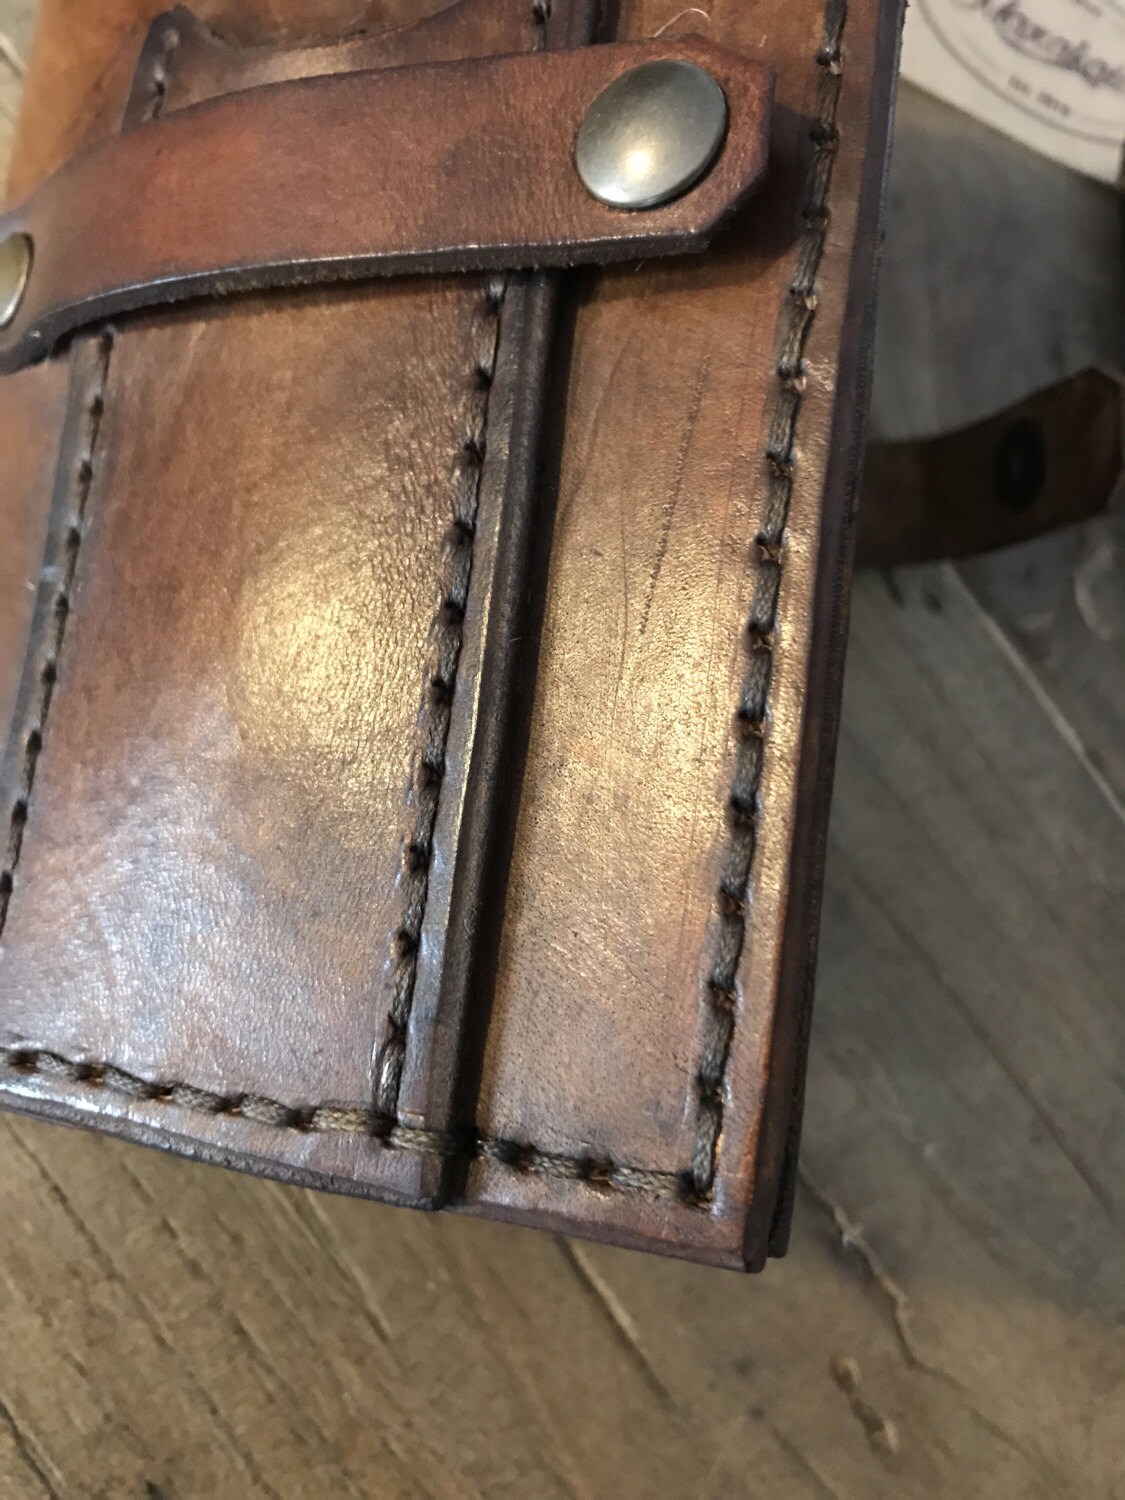 Field Notes leather cover